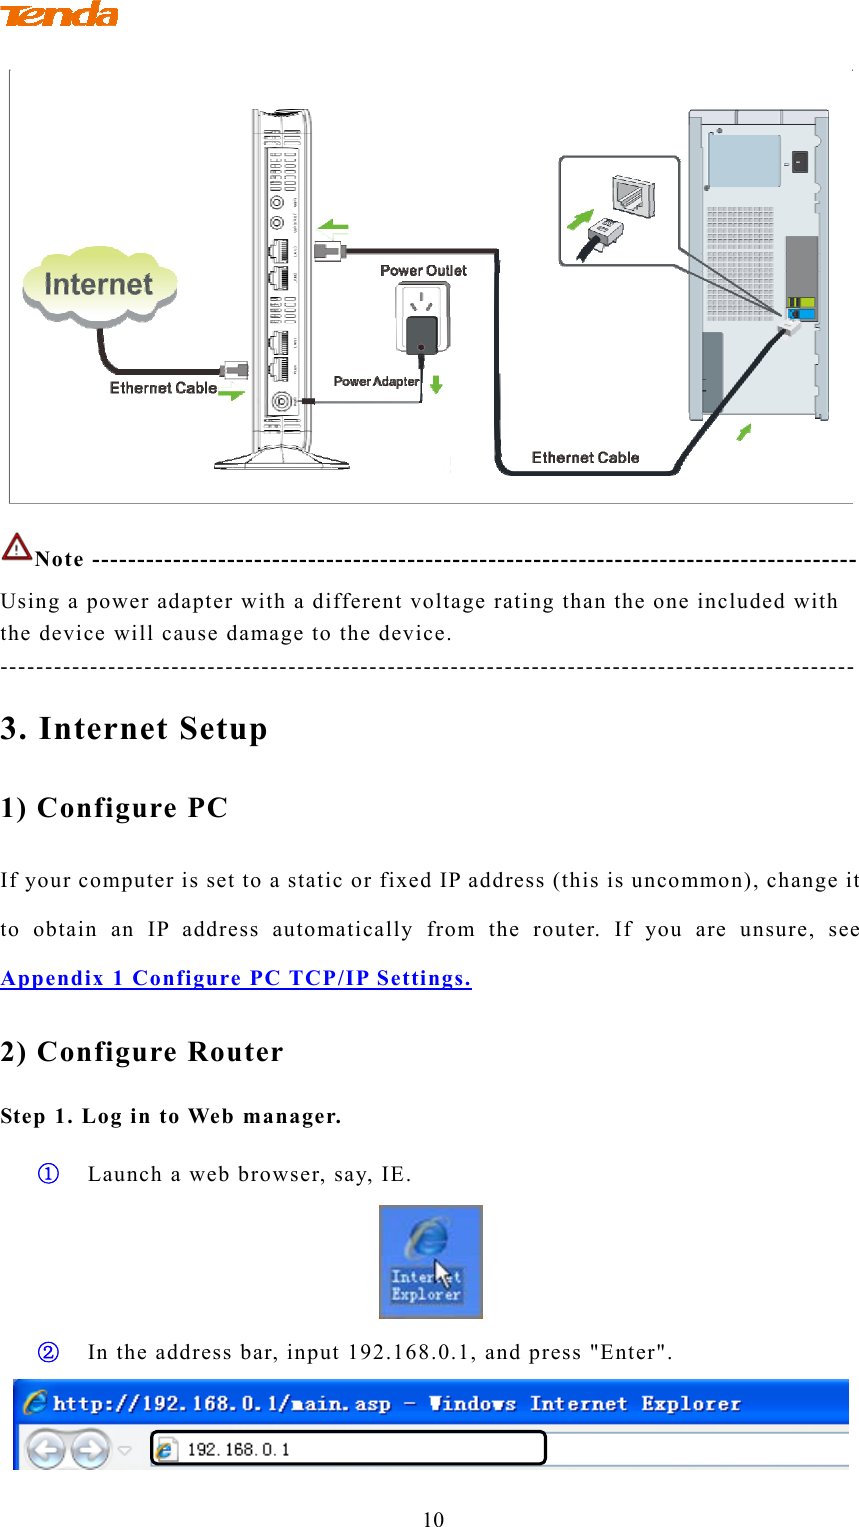                                        10  Note ------------------------------------------------------------------------------------- Using a power adapter with a different voltage rating than the one included with the device will cause damage to the device. ----------------------------------------------------------------------------------------------- 3. Internet Setup 1) Configure PC If your computer is set to a static or fixed IP address (this is uncommon), change it to obtain an IP address automatically from the router. If you are unsure, see Appendix 1 Configure PC TCP/IP Settings. 2) Configure Router Step 1. Log in to Web manager. ① Launch a web browser, say, IE.  ② In the address bar, input 192.168.0.1, and press &quot;Enter&quot;.  